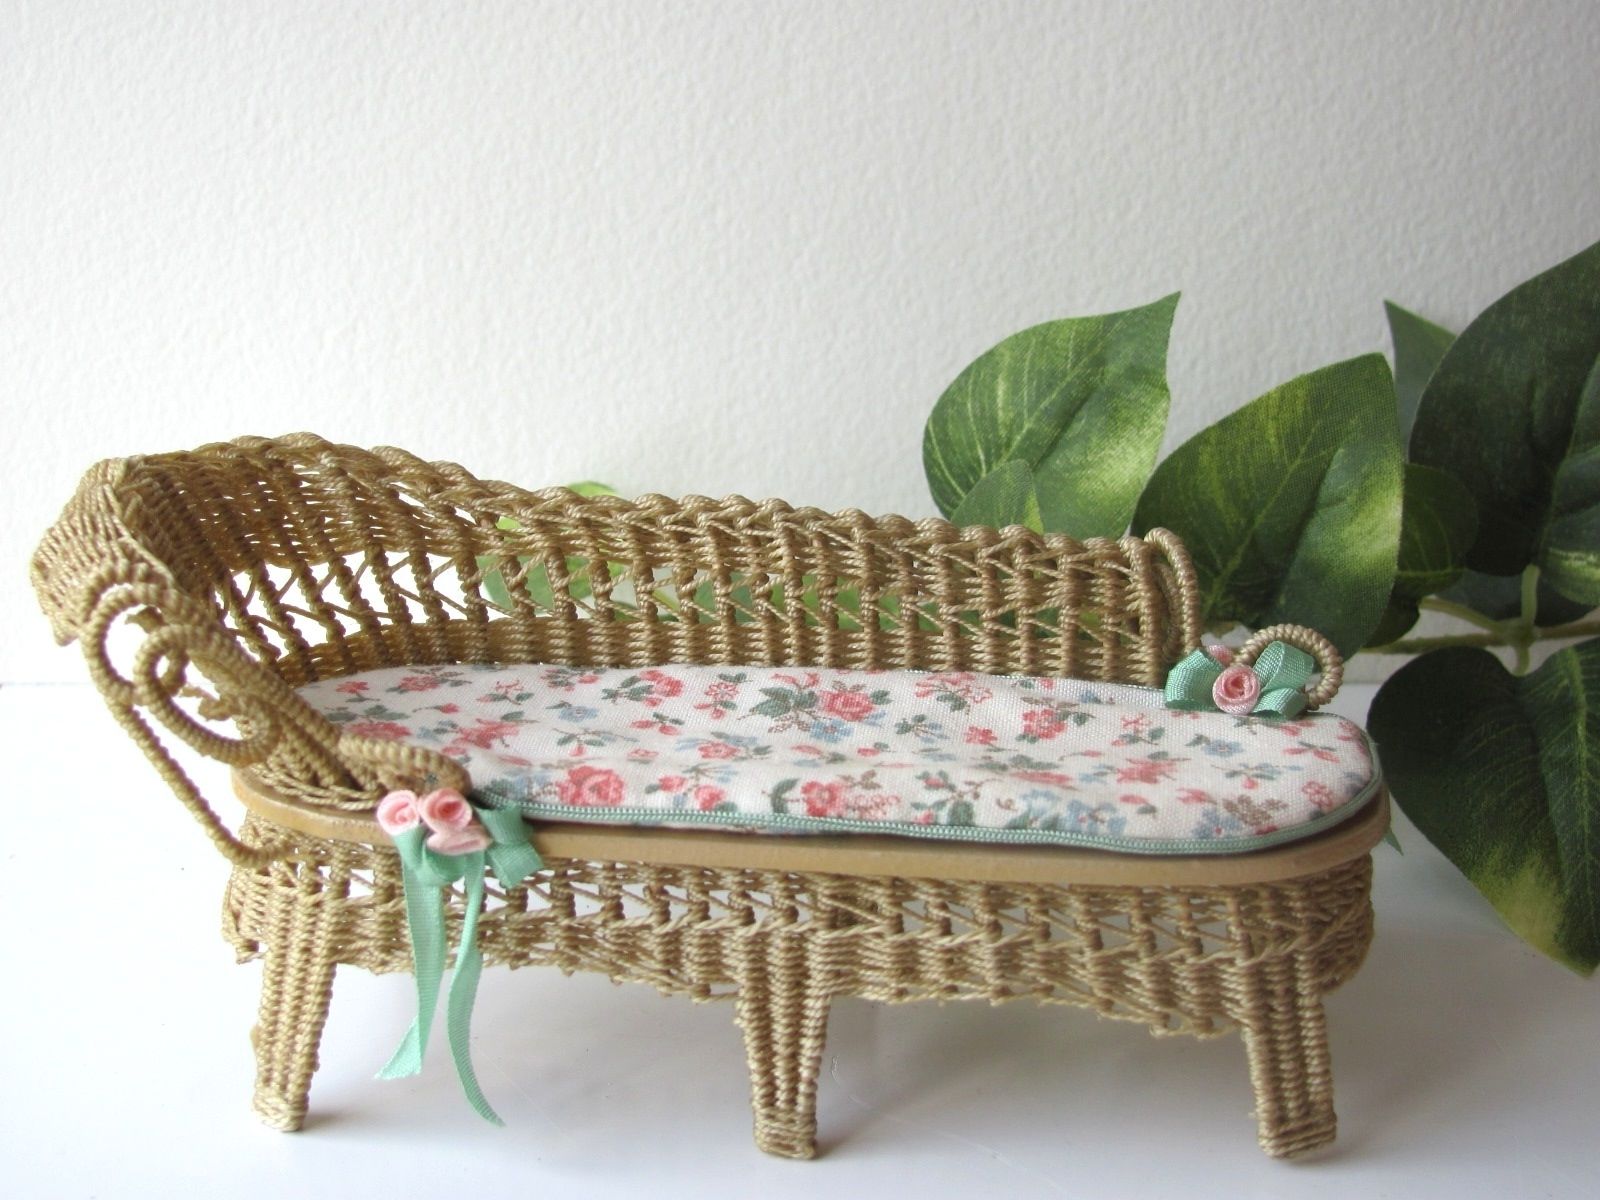 Recent Country Cottage Chic Wicker Chaise Lounge 1/12 Miniature Dollhouse Regarding Wicker Chaises (View 14 of 15)